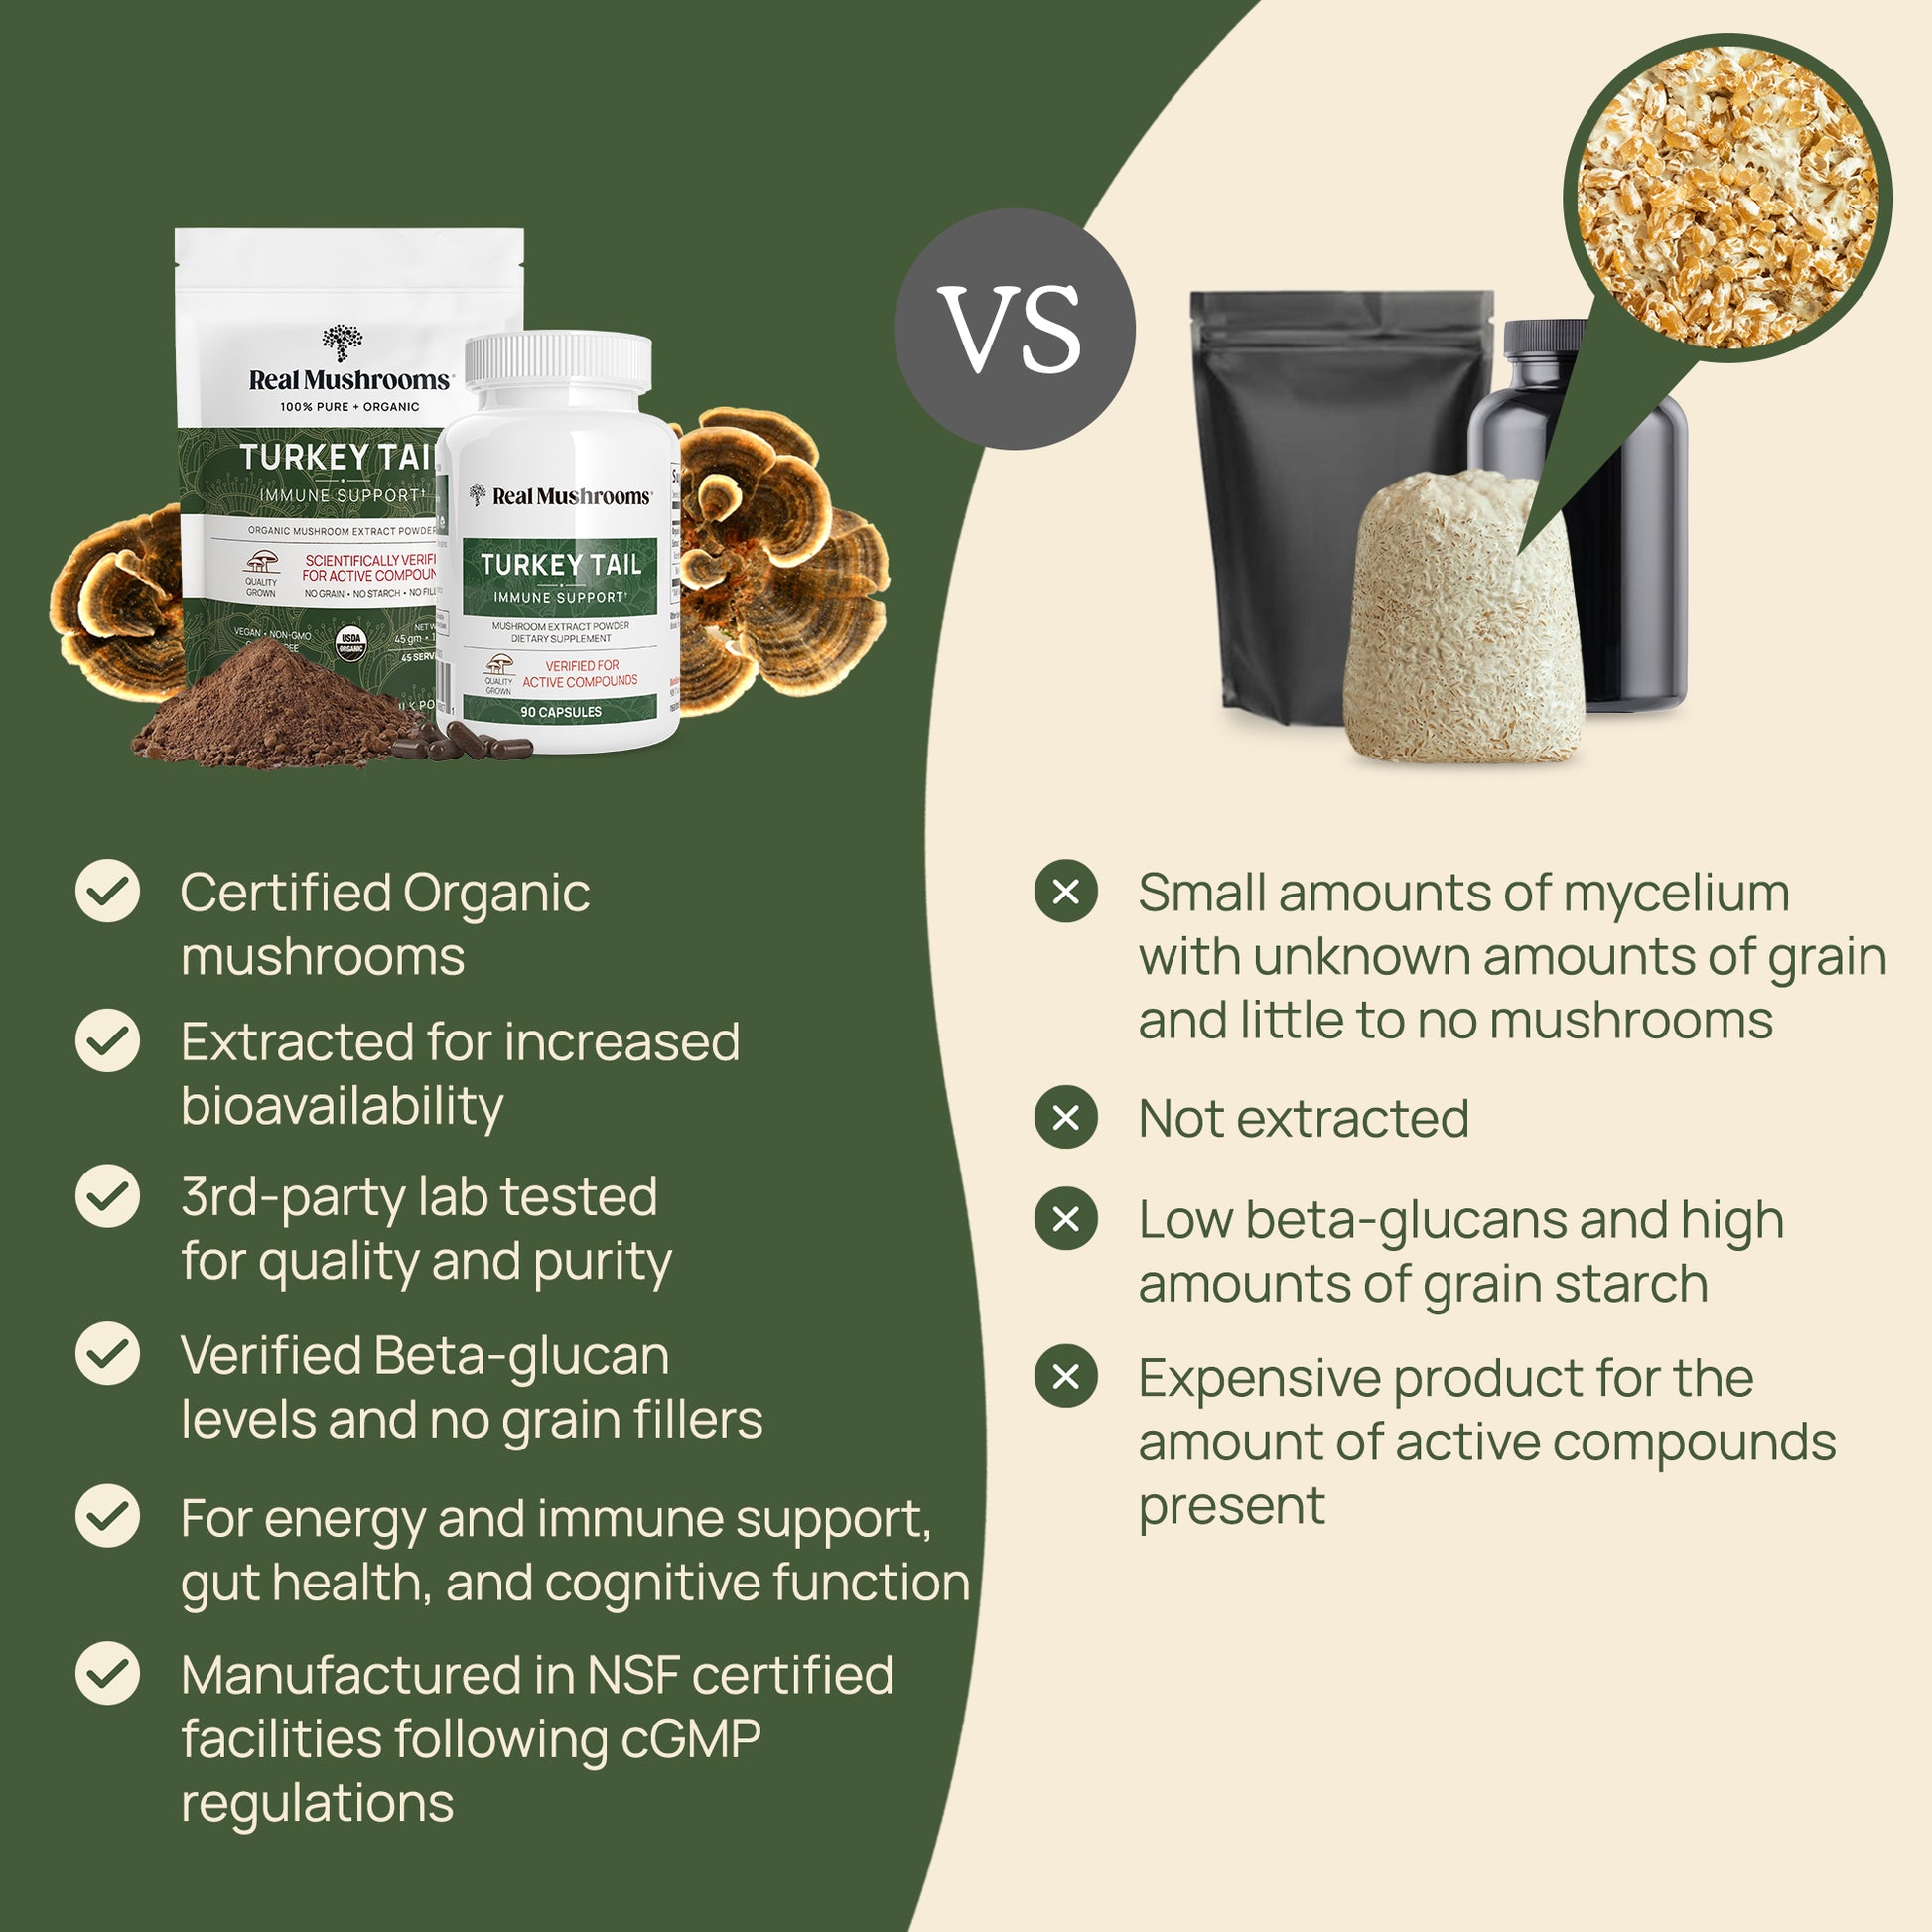 Comparison between two different types of Real Mushrooms Turkey Tail Mushroom Extract Powder for Pets, highlighting the advantages of a certified organic mushroom extract over one with unknown amounts of mycelium on grain. The left product boasts several certifications and health benefits.